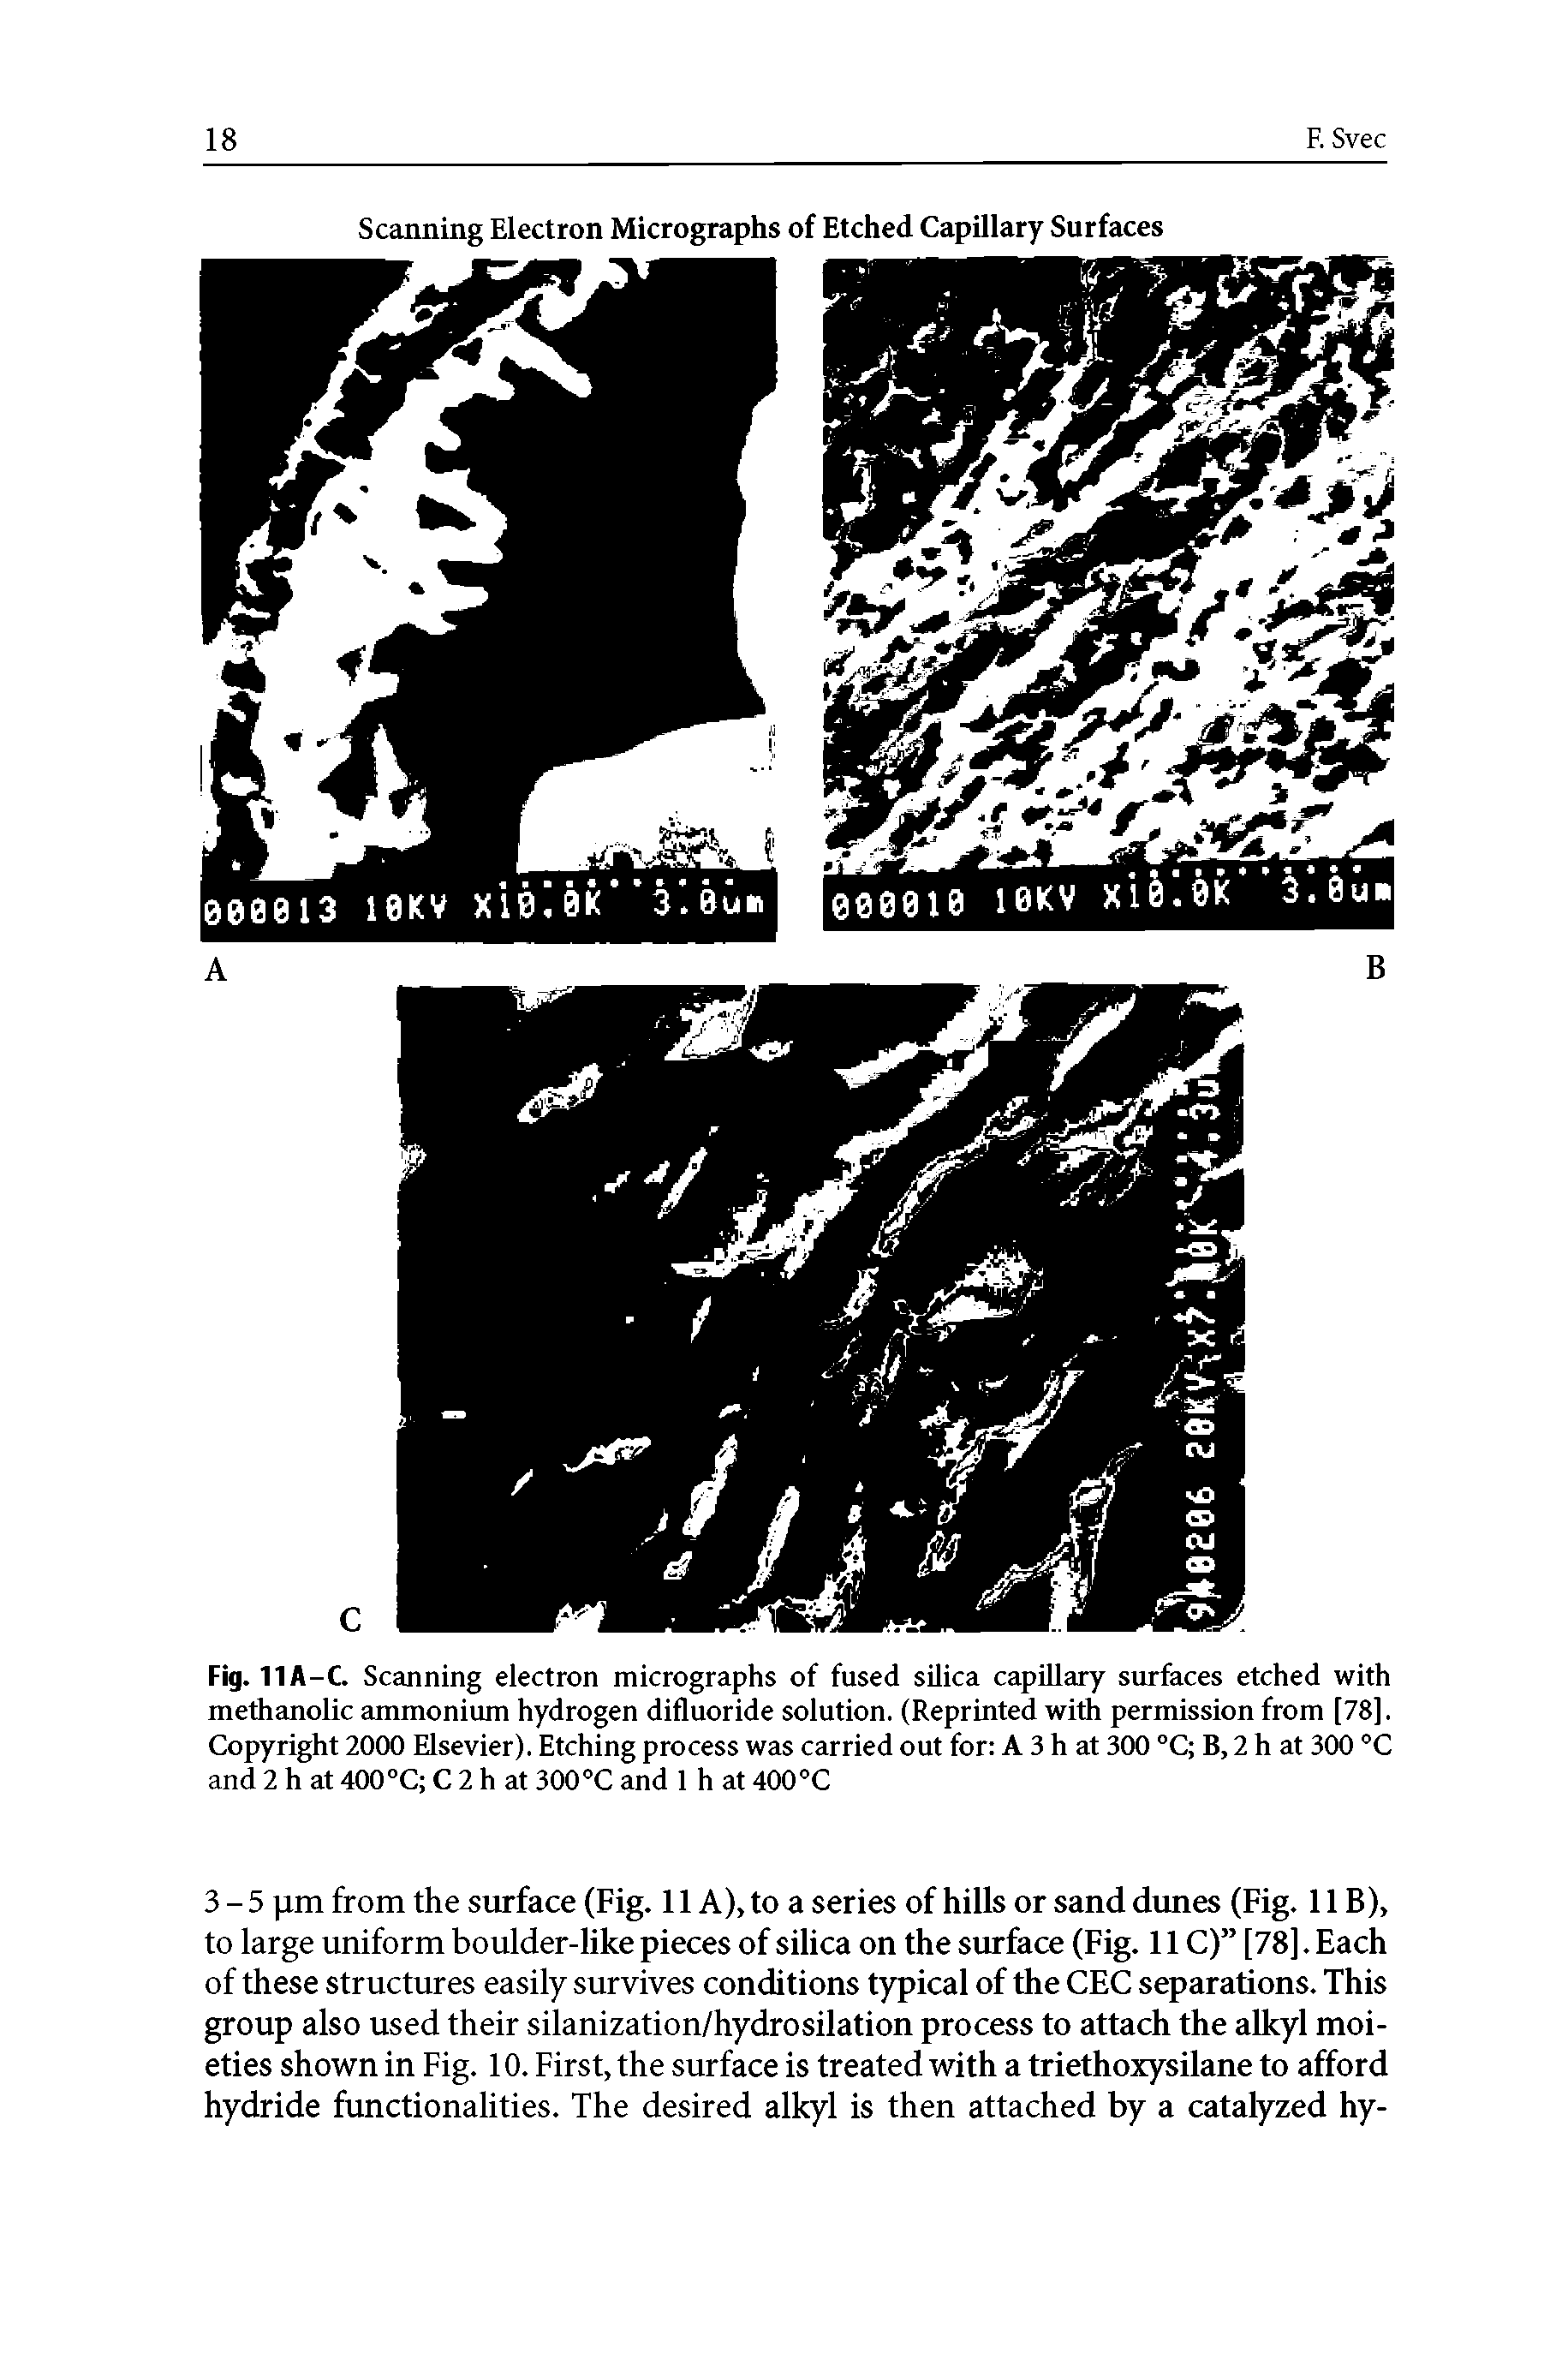 Fig. 11A-C. Scanning electron micrographs of fused silica capillary surfaces etched with methanolic ammonium hydrogen difluoride solution. (Reprinted with permission from [78], Copyright 2000 Elsevier). Etching process was carried out for A 3 h at 300 °C B, 2 h at 300 °C and 2 h at 400 °C C 2 h at 300 °C and 1 h at 400 °C...